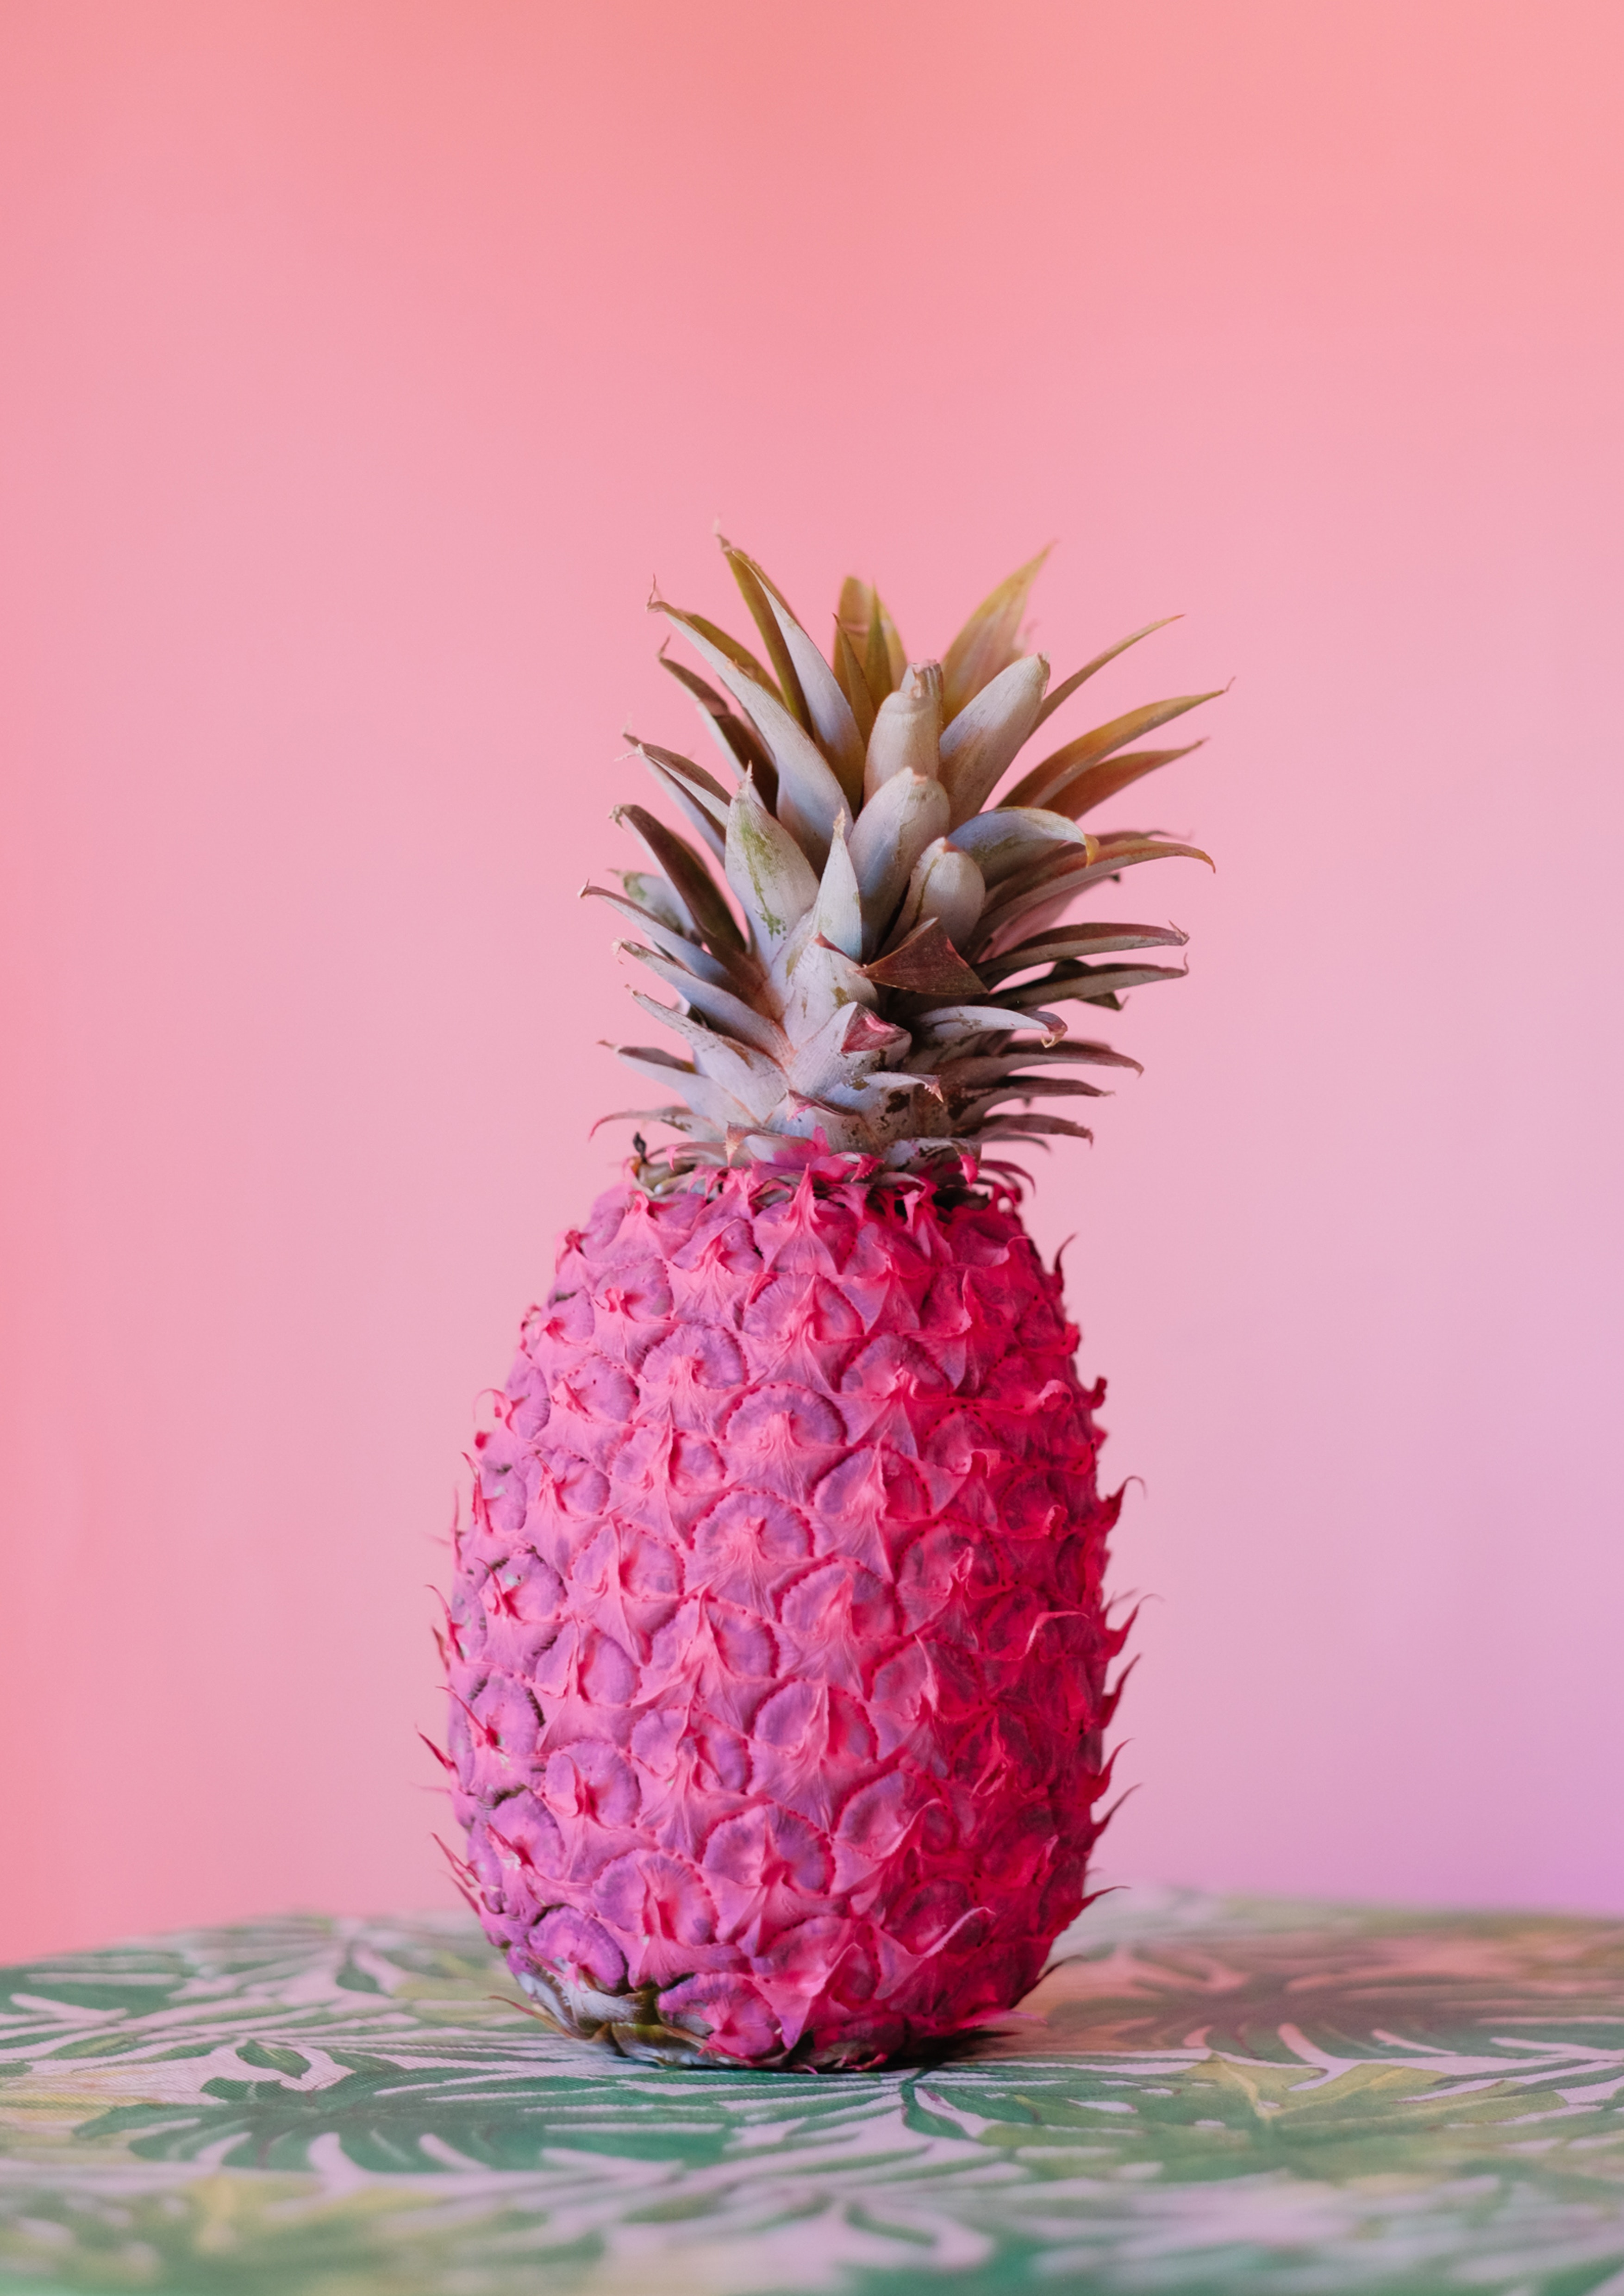 113075 Screensavers and Wallpapers Fruit for phone. Download food, pink, paint, fruit, tropical, pineapple pictures for free